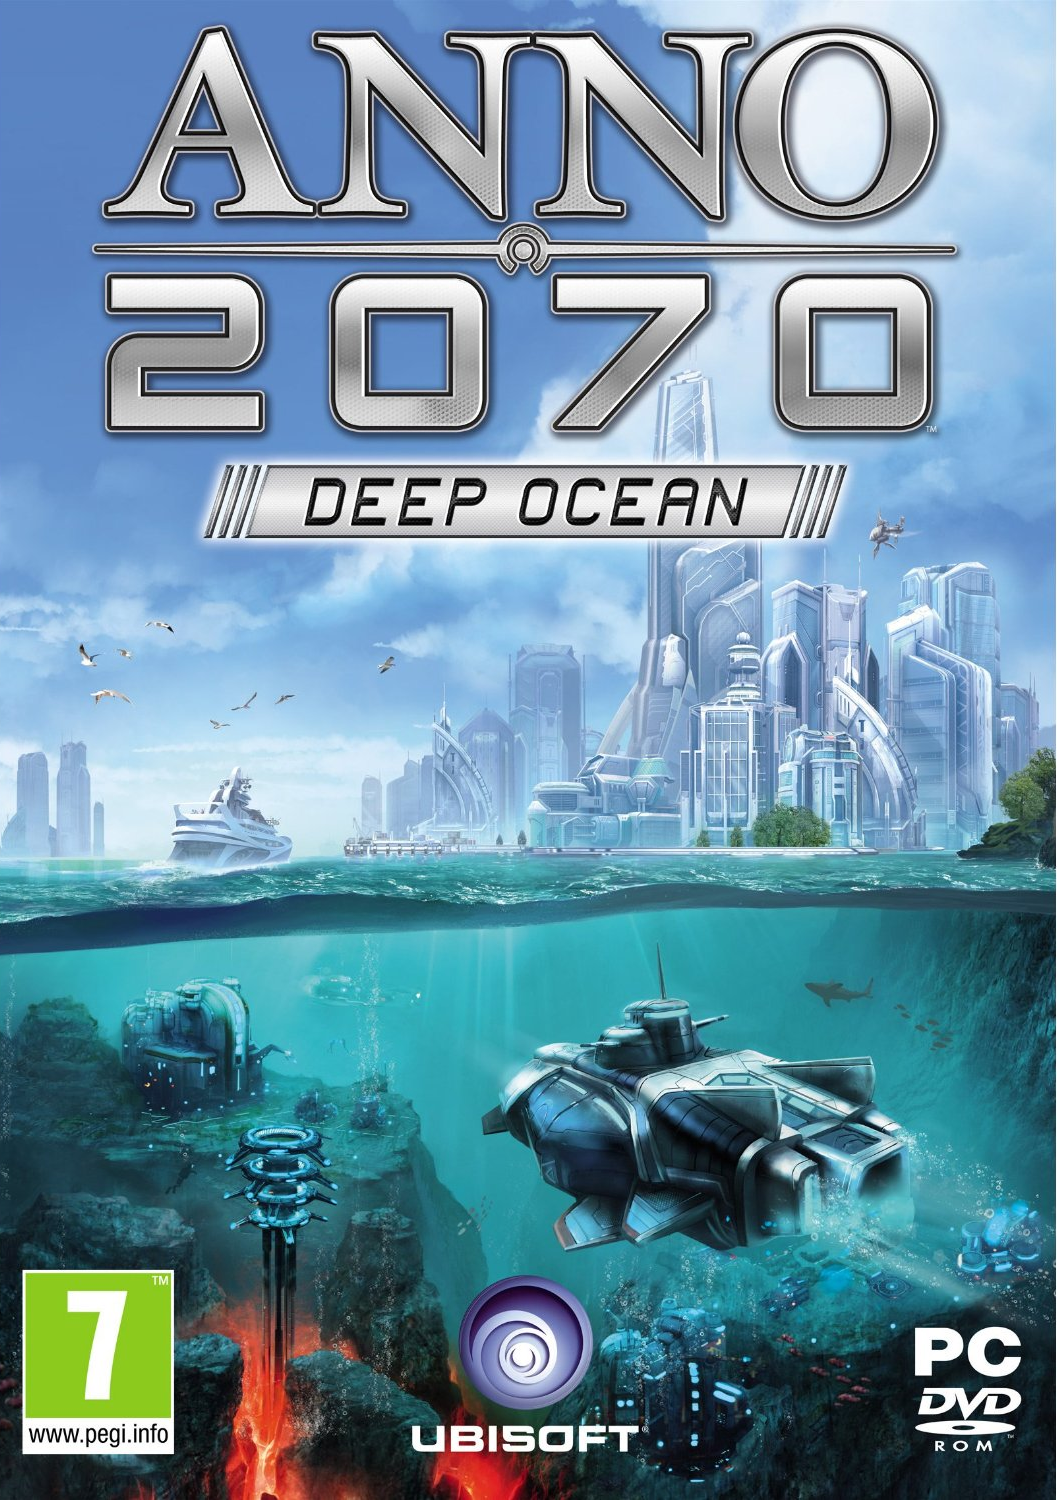 Anno 2070 PC Game With Serial number Free Download